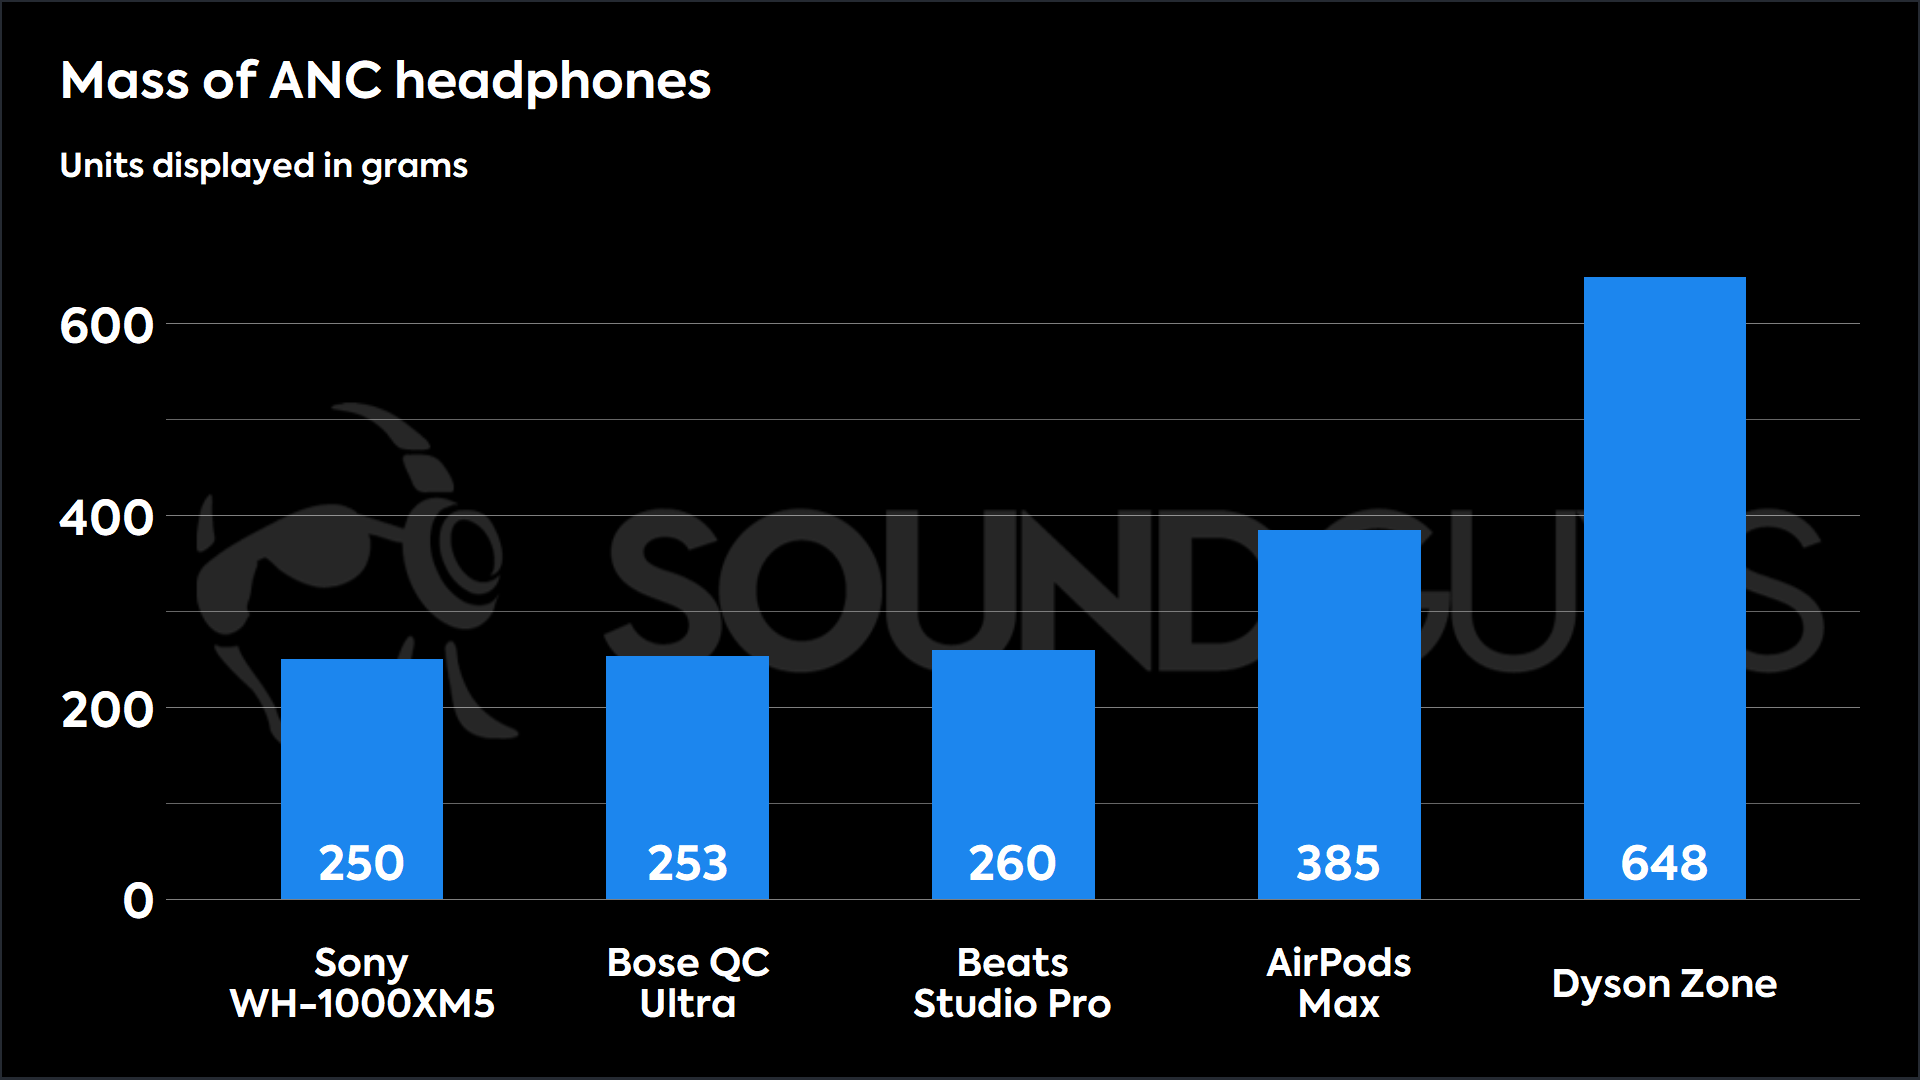 A chart showing the masses of other popular ANC headphones versus the Dyson Zone Absolute Plus.